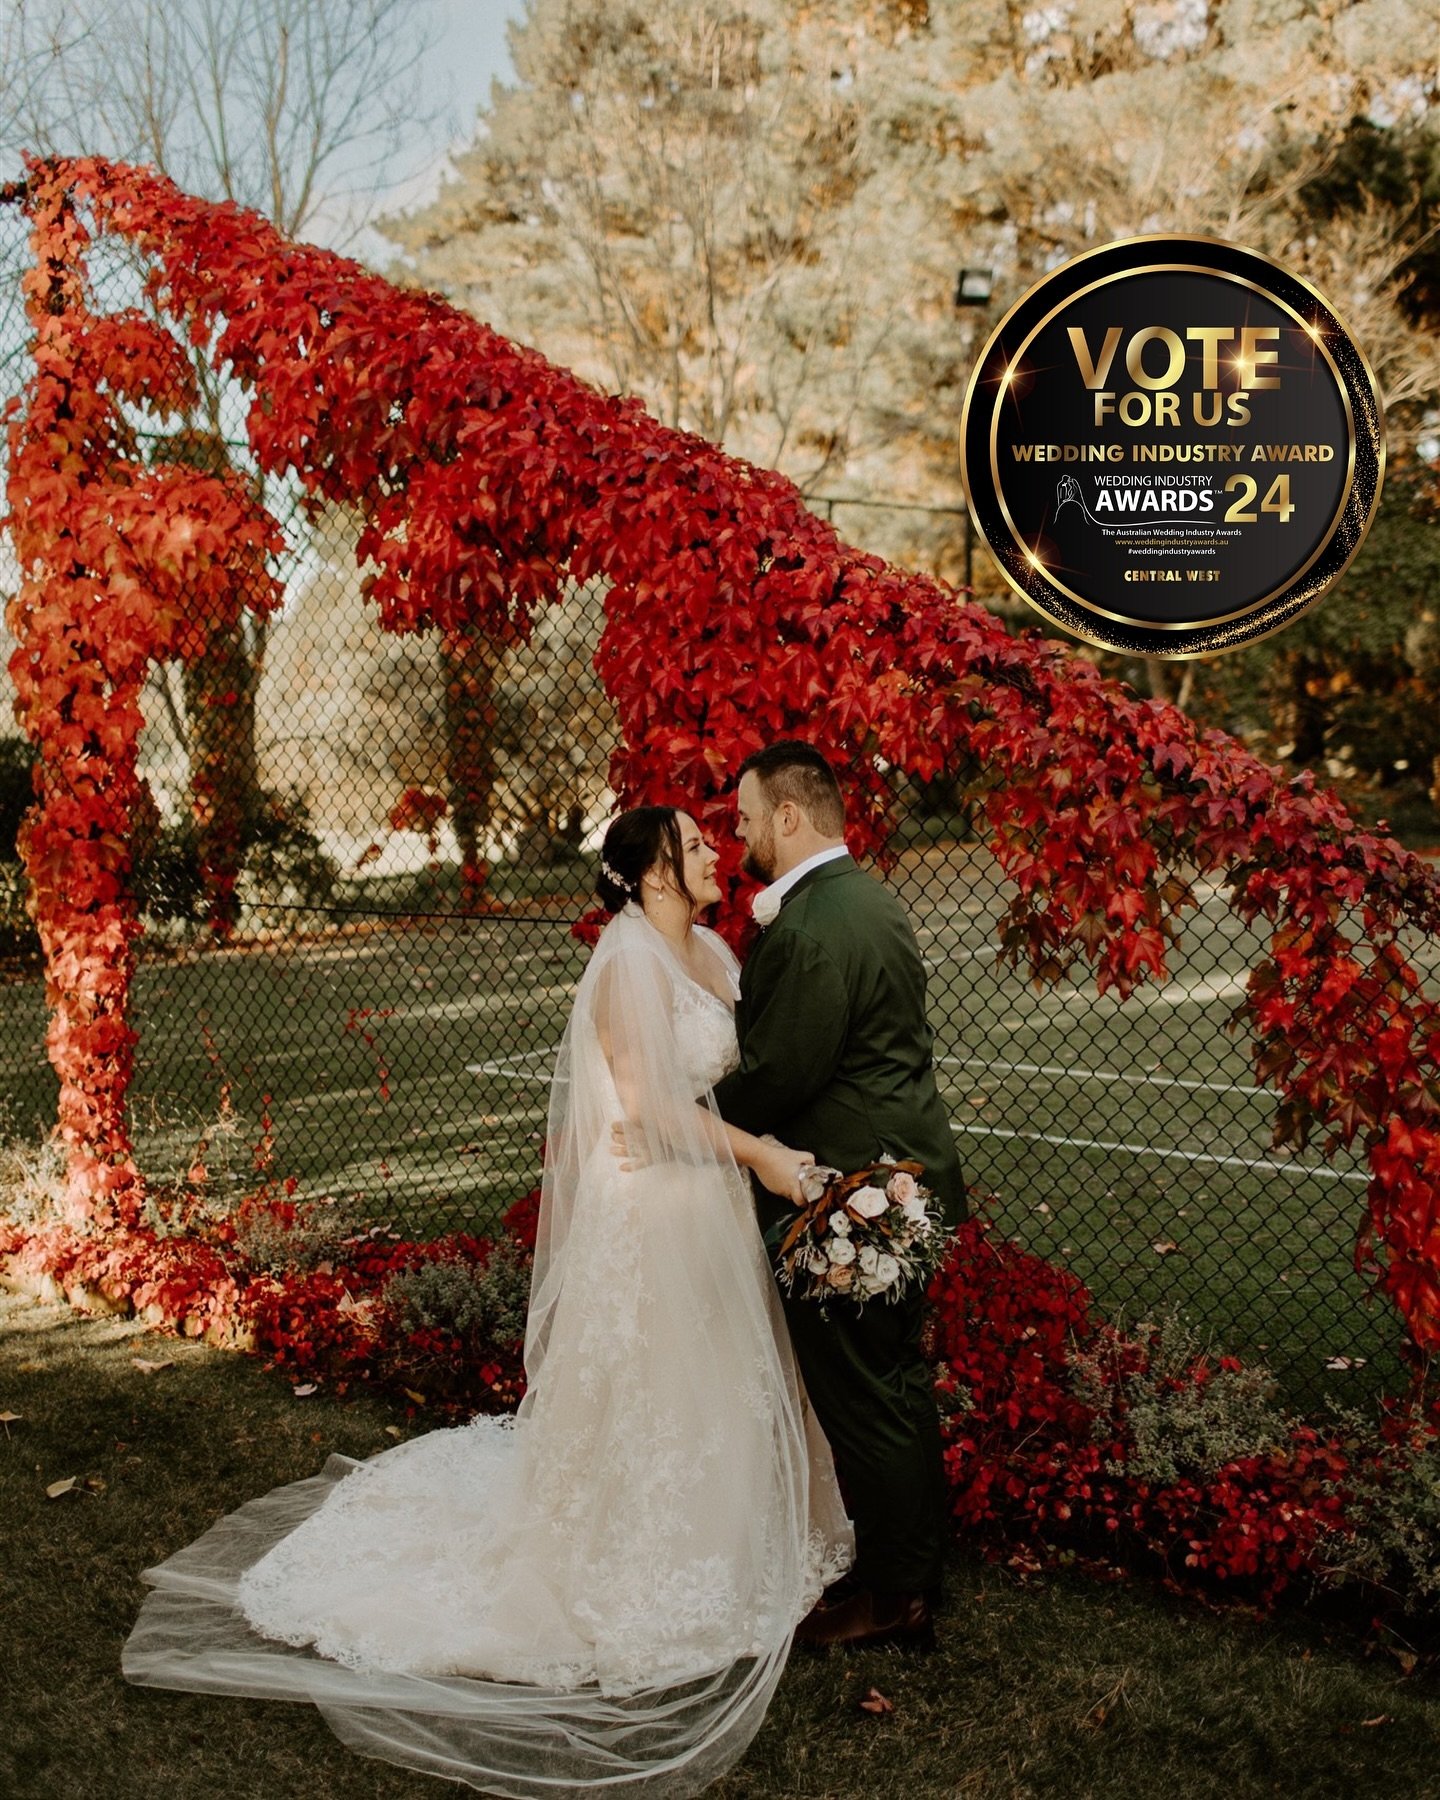 👋🏼 Voting is now open for the CENTRAL WEST NSW &ndash; Wedding Industry Awards&trade; 2024!

If you are one of our incredible Newlywed Couples who were married after 30th April 2023, then you are eligible to cast a vote in the 2024 Wedding Industry